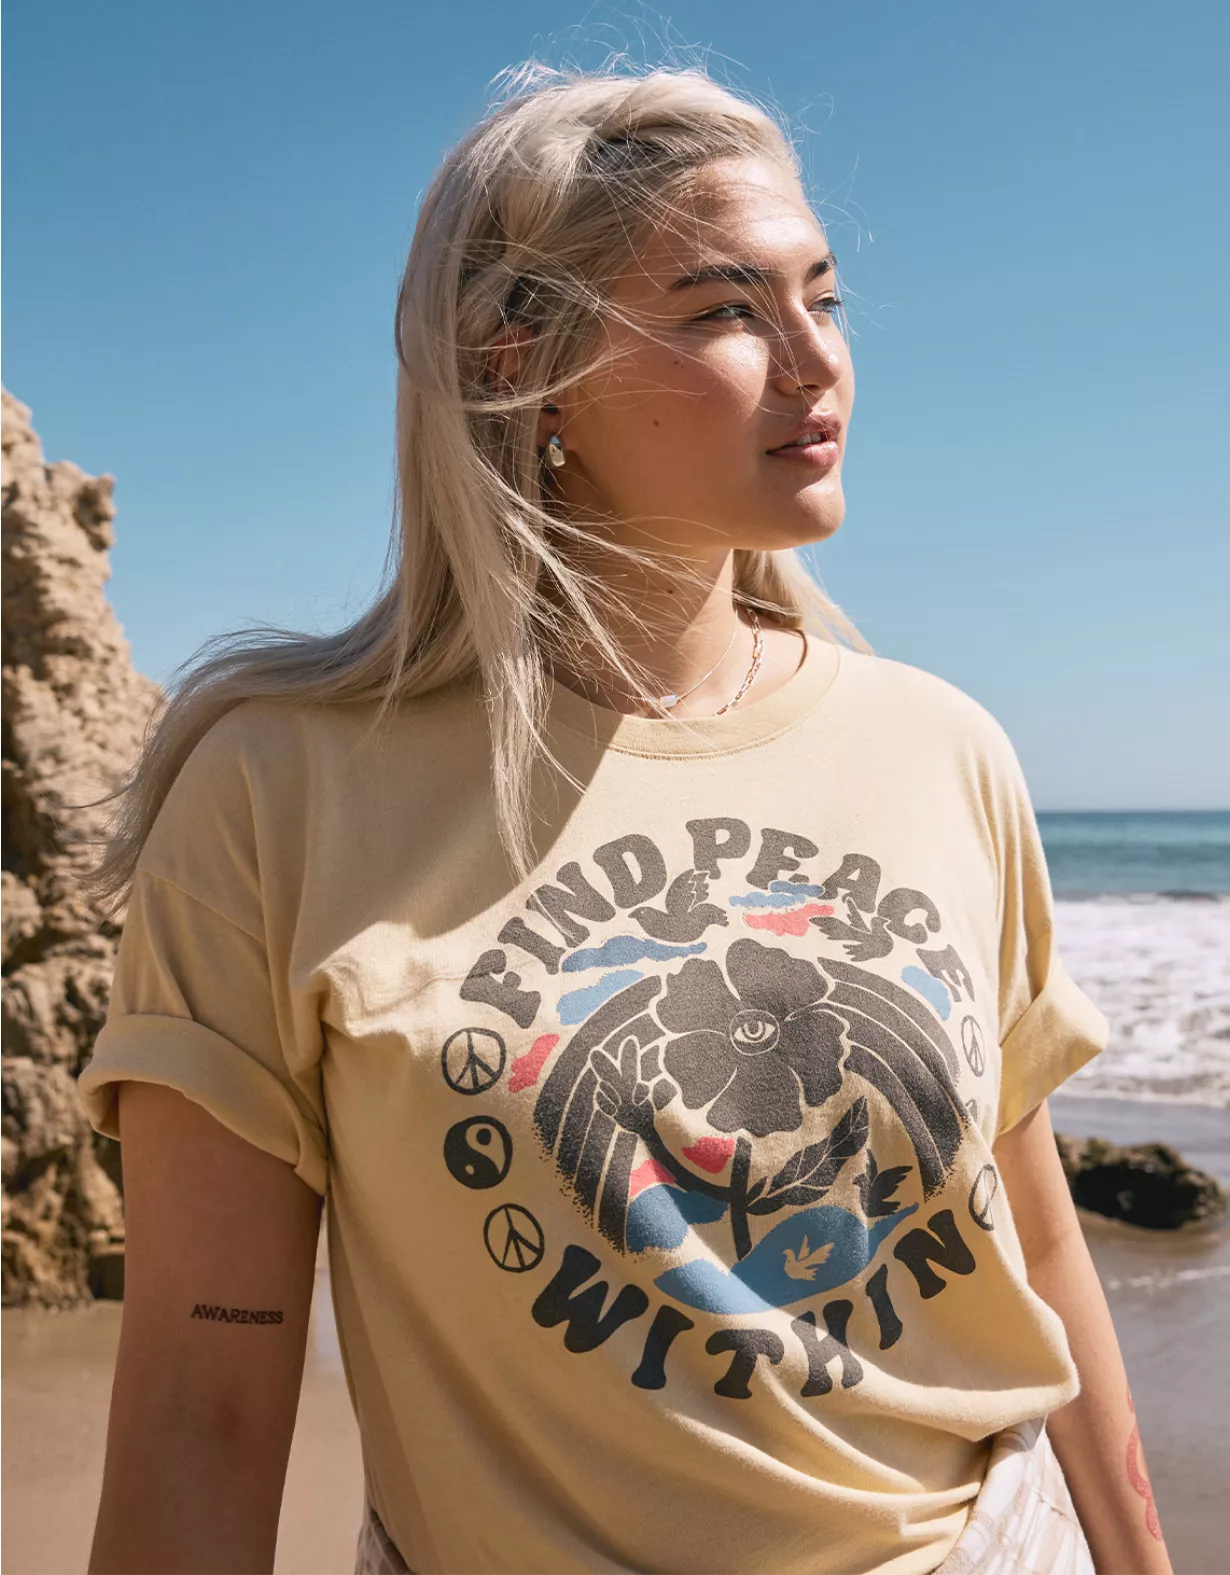 AE Oversized Find Peace Within Graphic Tee